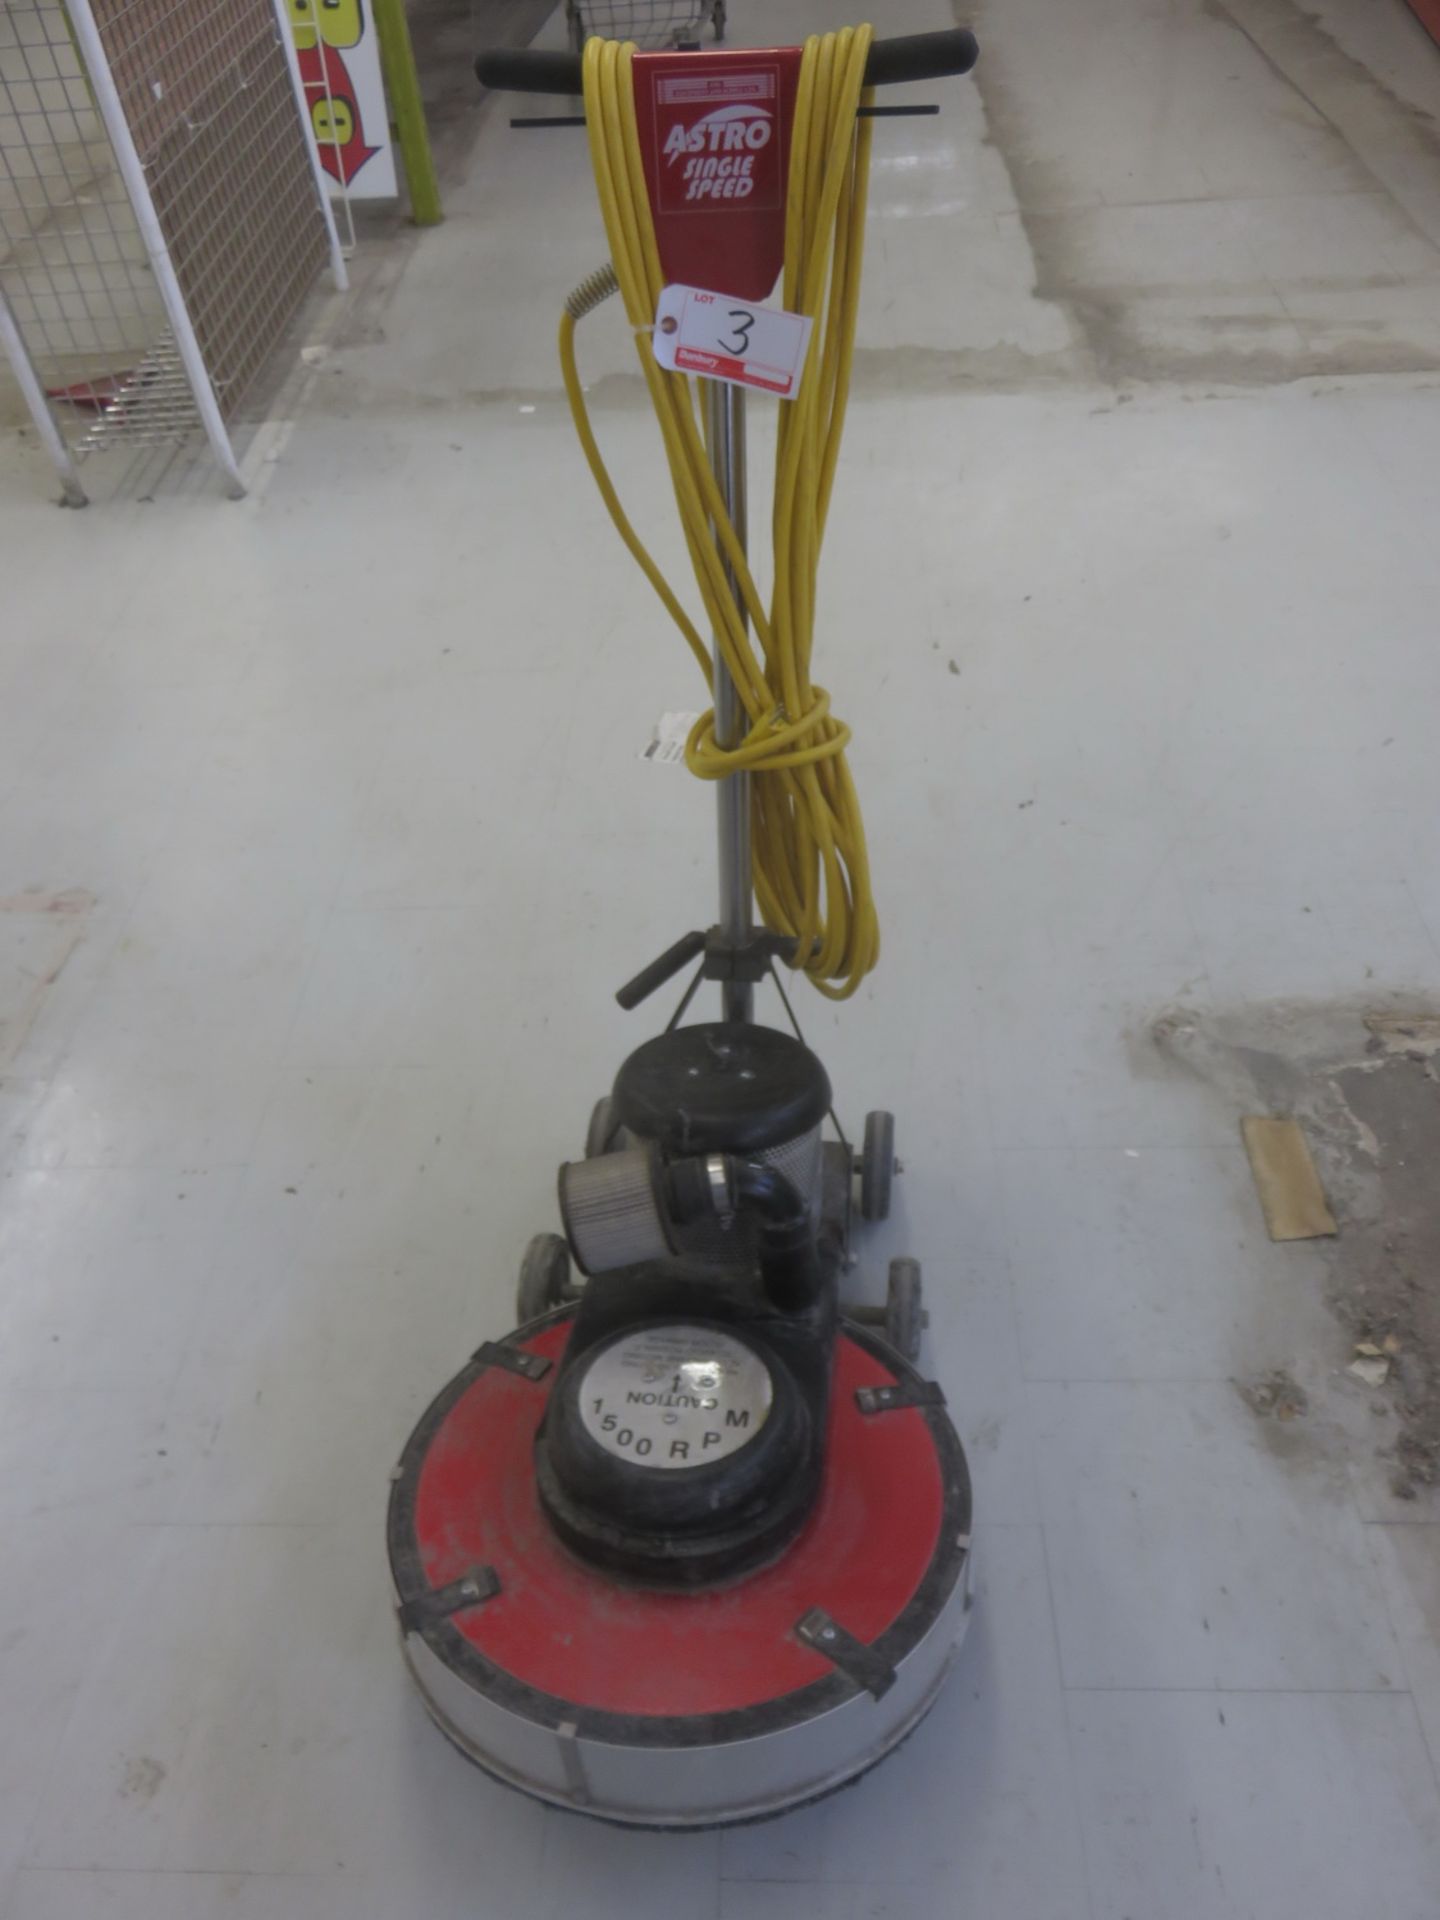 ASTRO 1500RPM ELECTRIC APPROX. 20"DIA FLOOR POLISHER